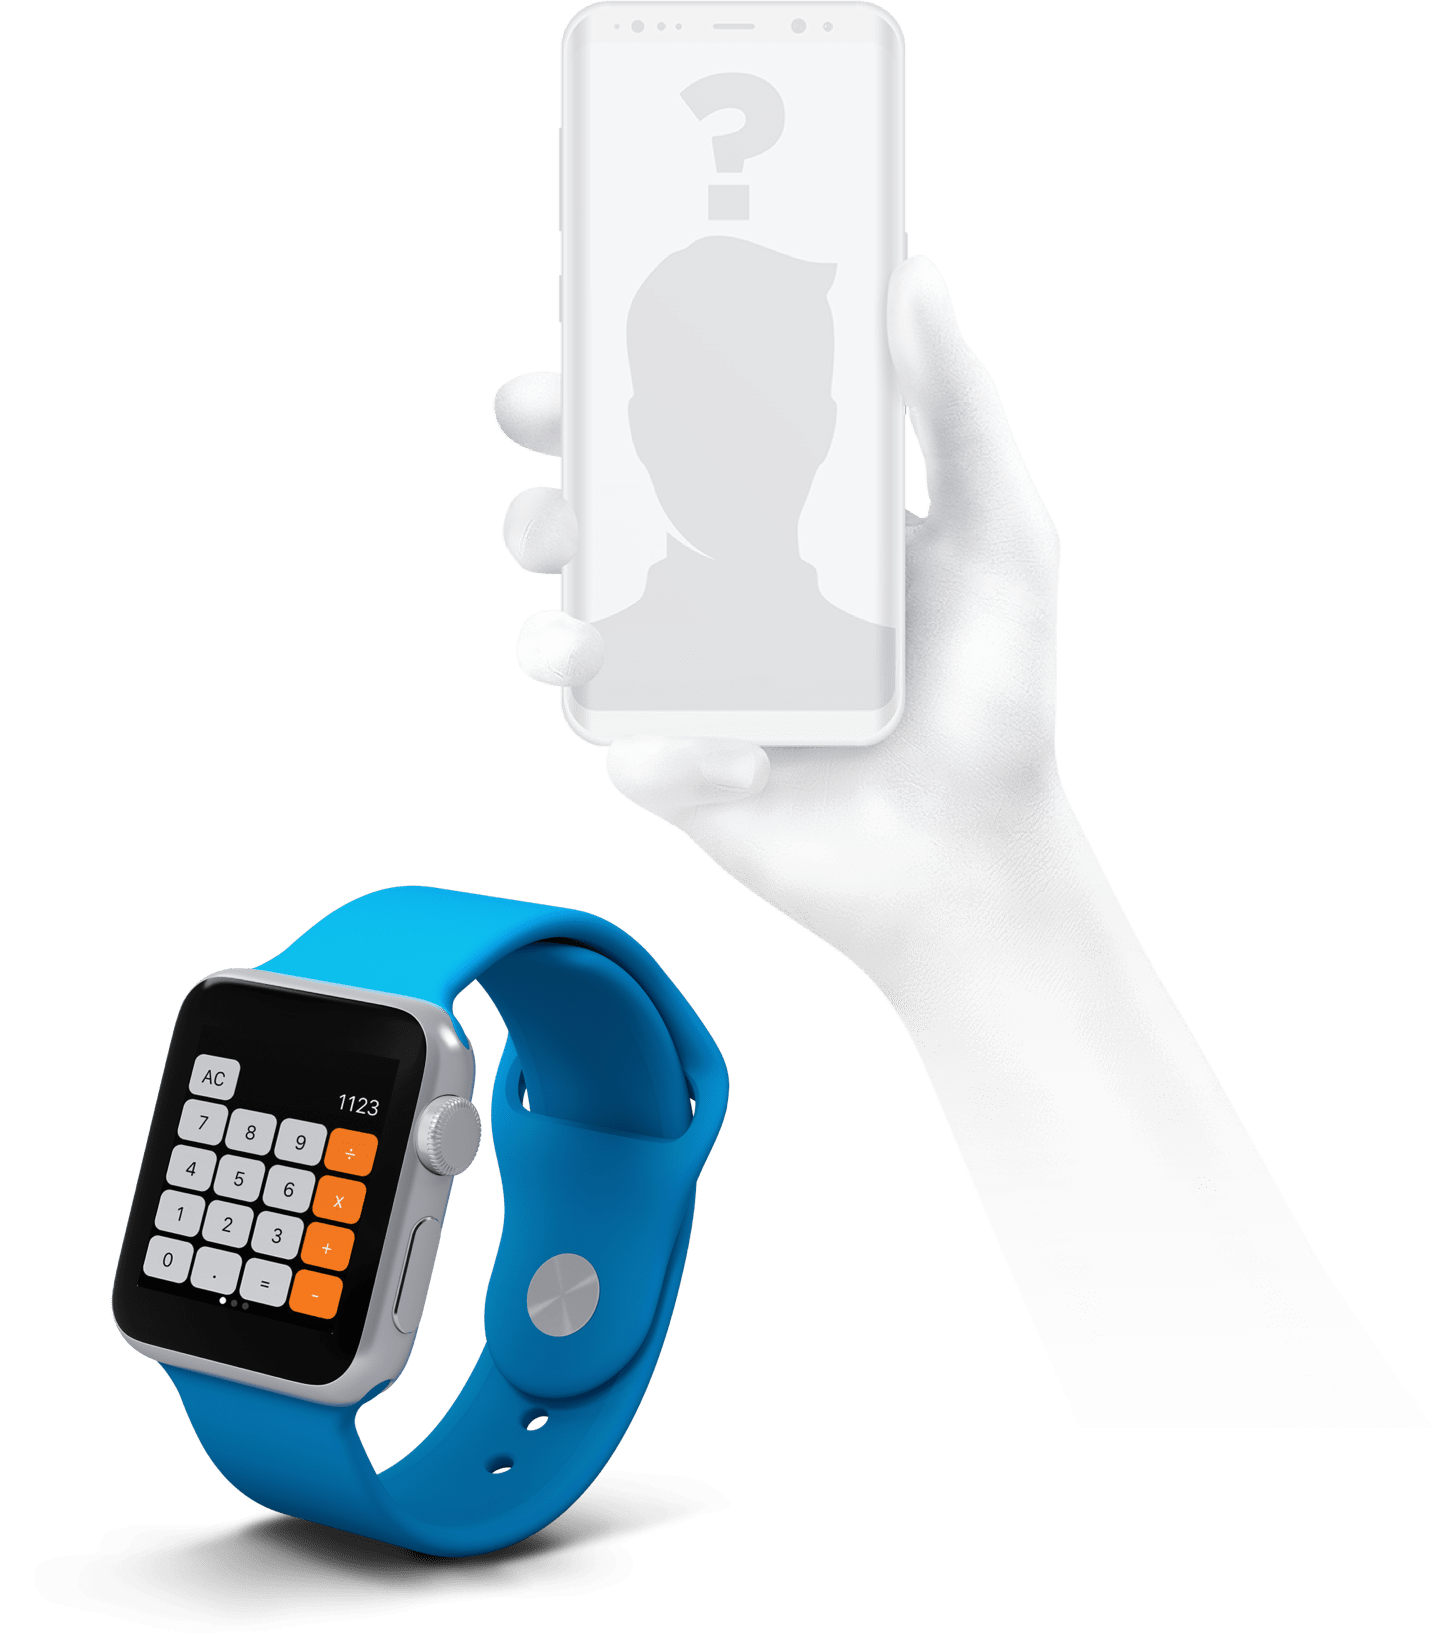 smartwatch as an analogy for considerations to create a successful app